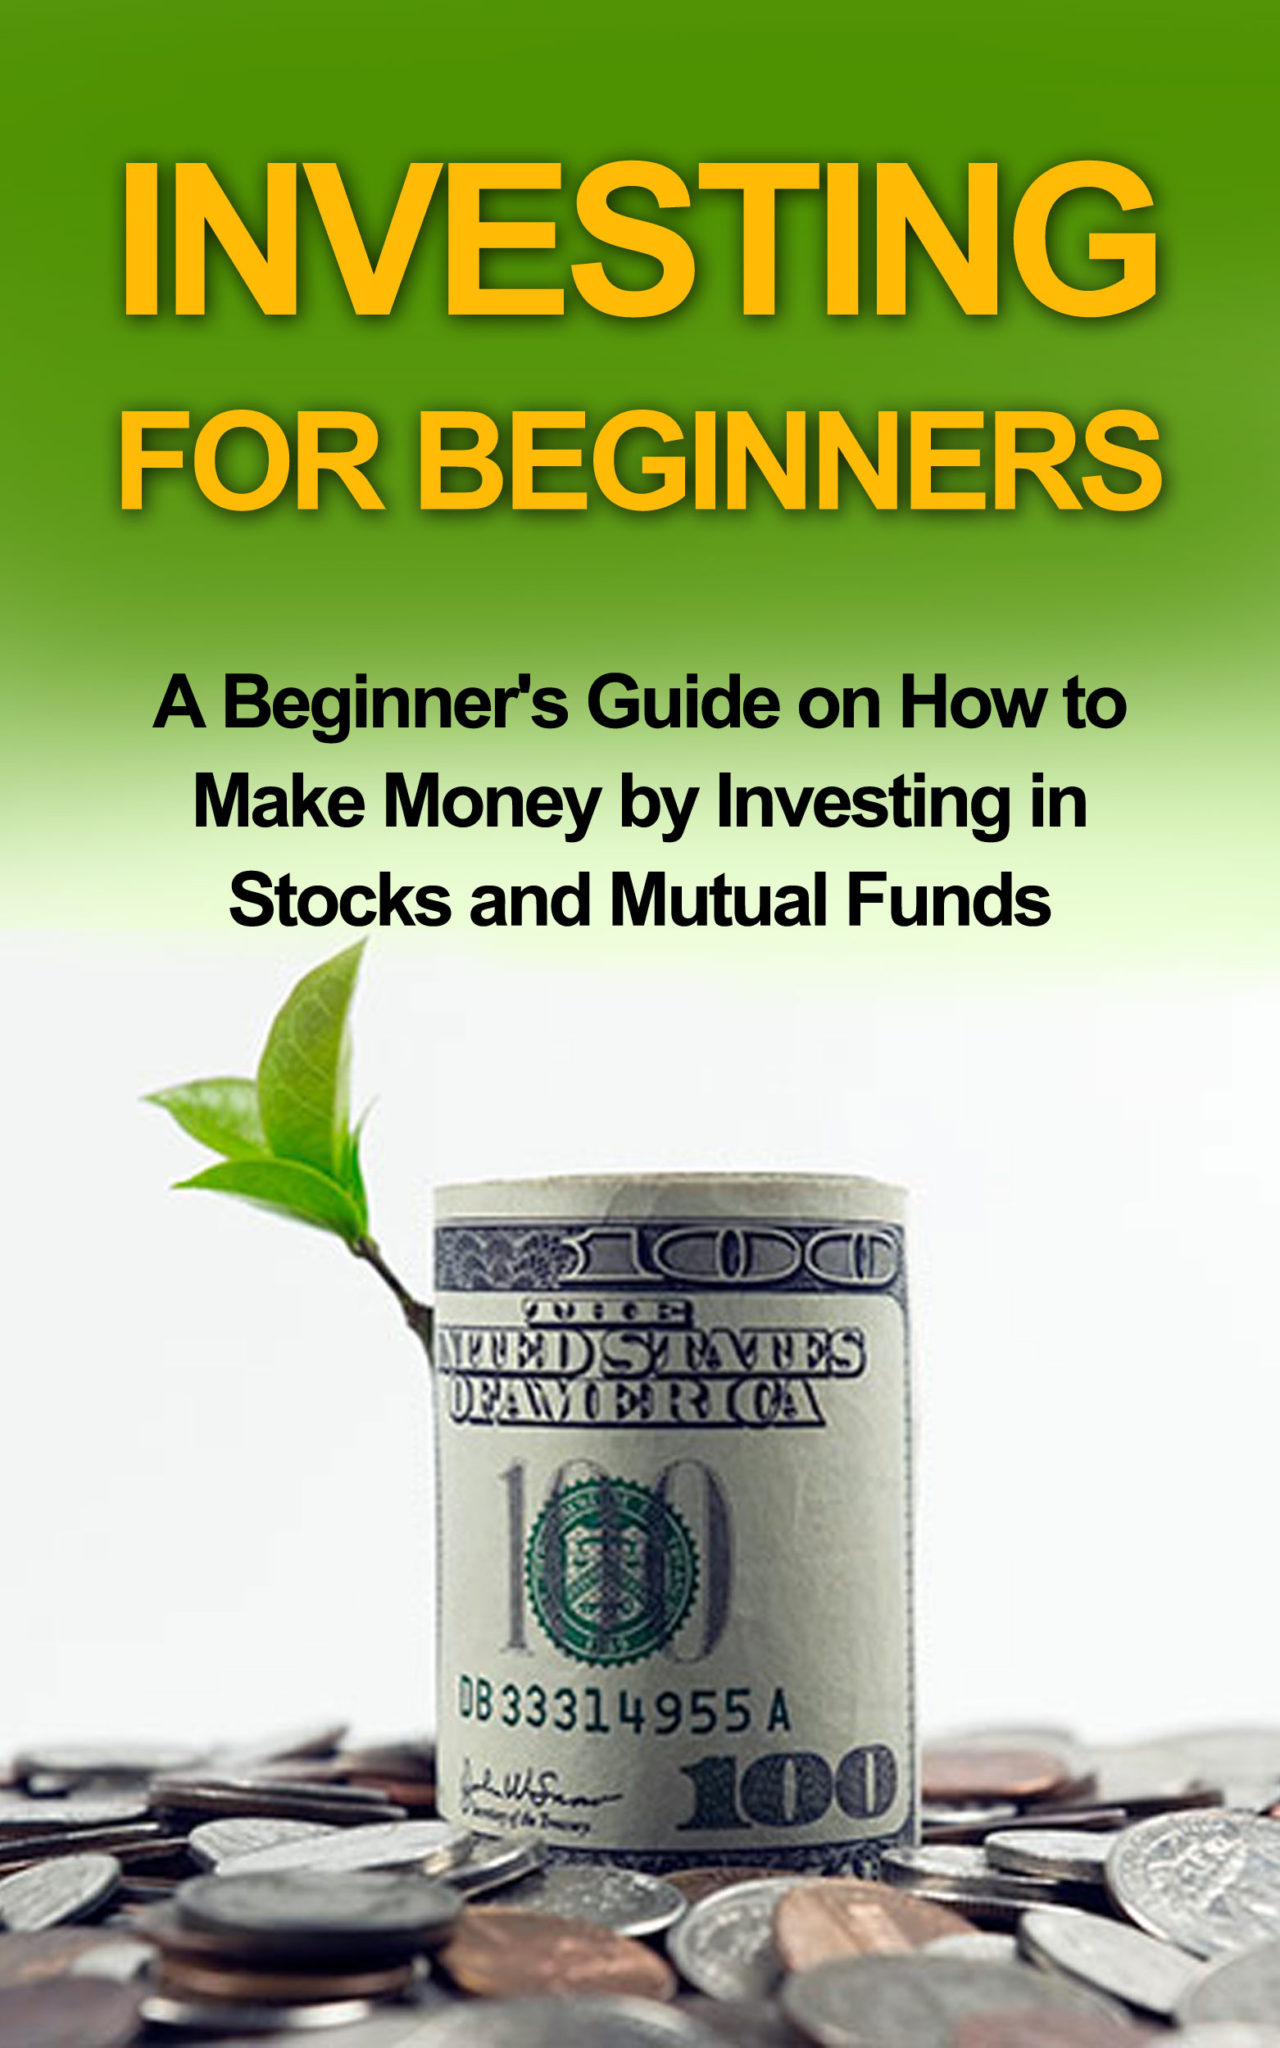 Investing for Beginners – A Beginner’s Guide on how to Make Money by Investing in Stocks and Mutual Funds by Ryan Smith